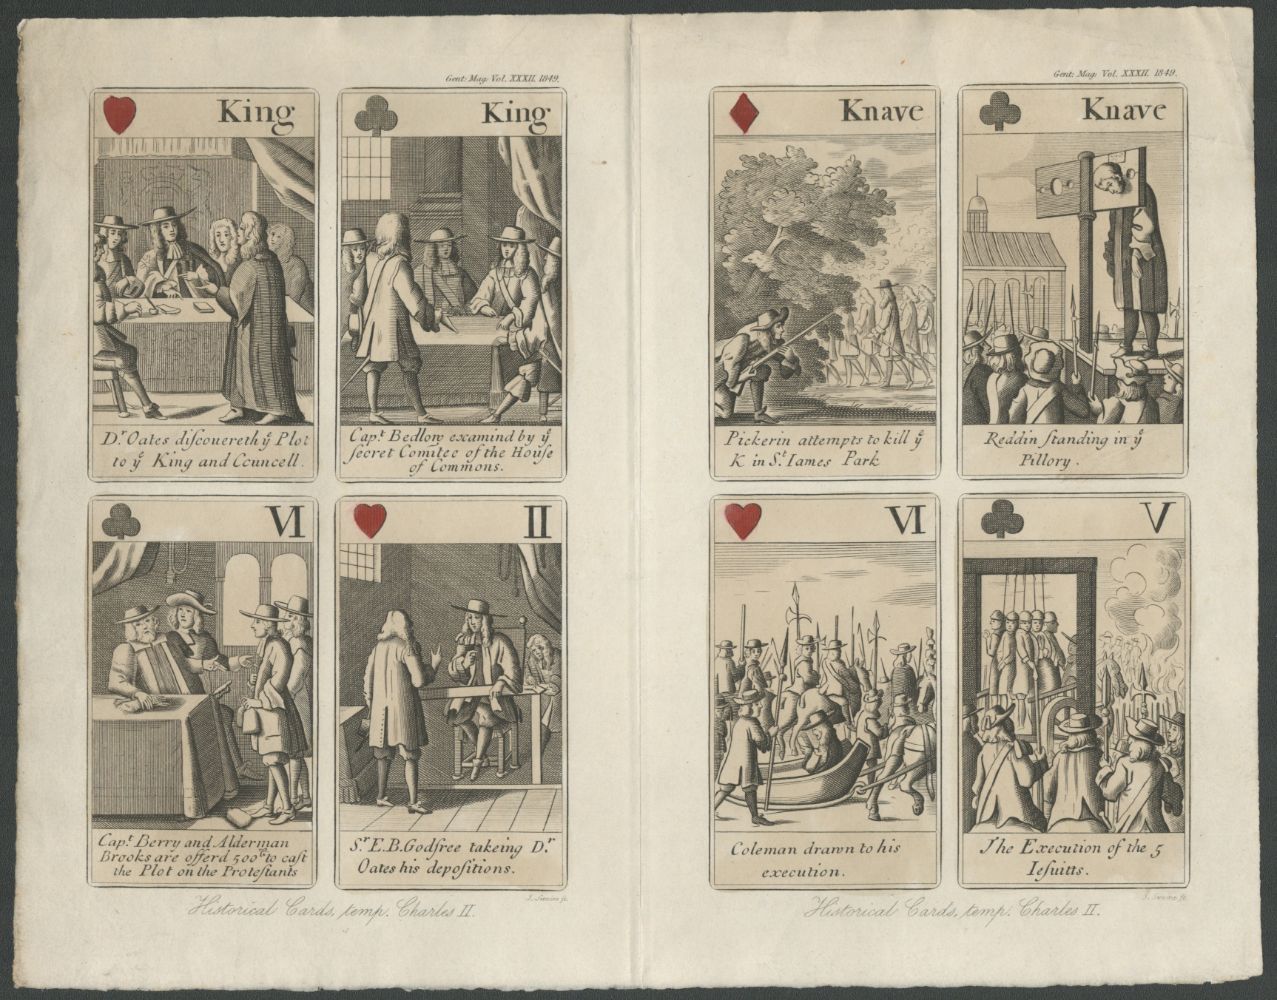 ONLINE ONLY - SPECIAL SALE OF PLAYING CARDS & RELATED EPHEMERA AND COLLECTABLES